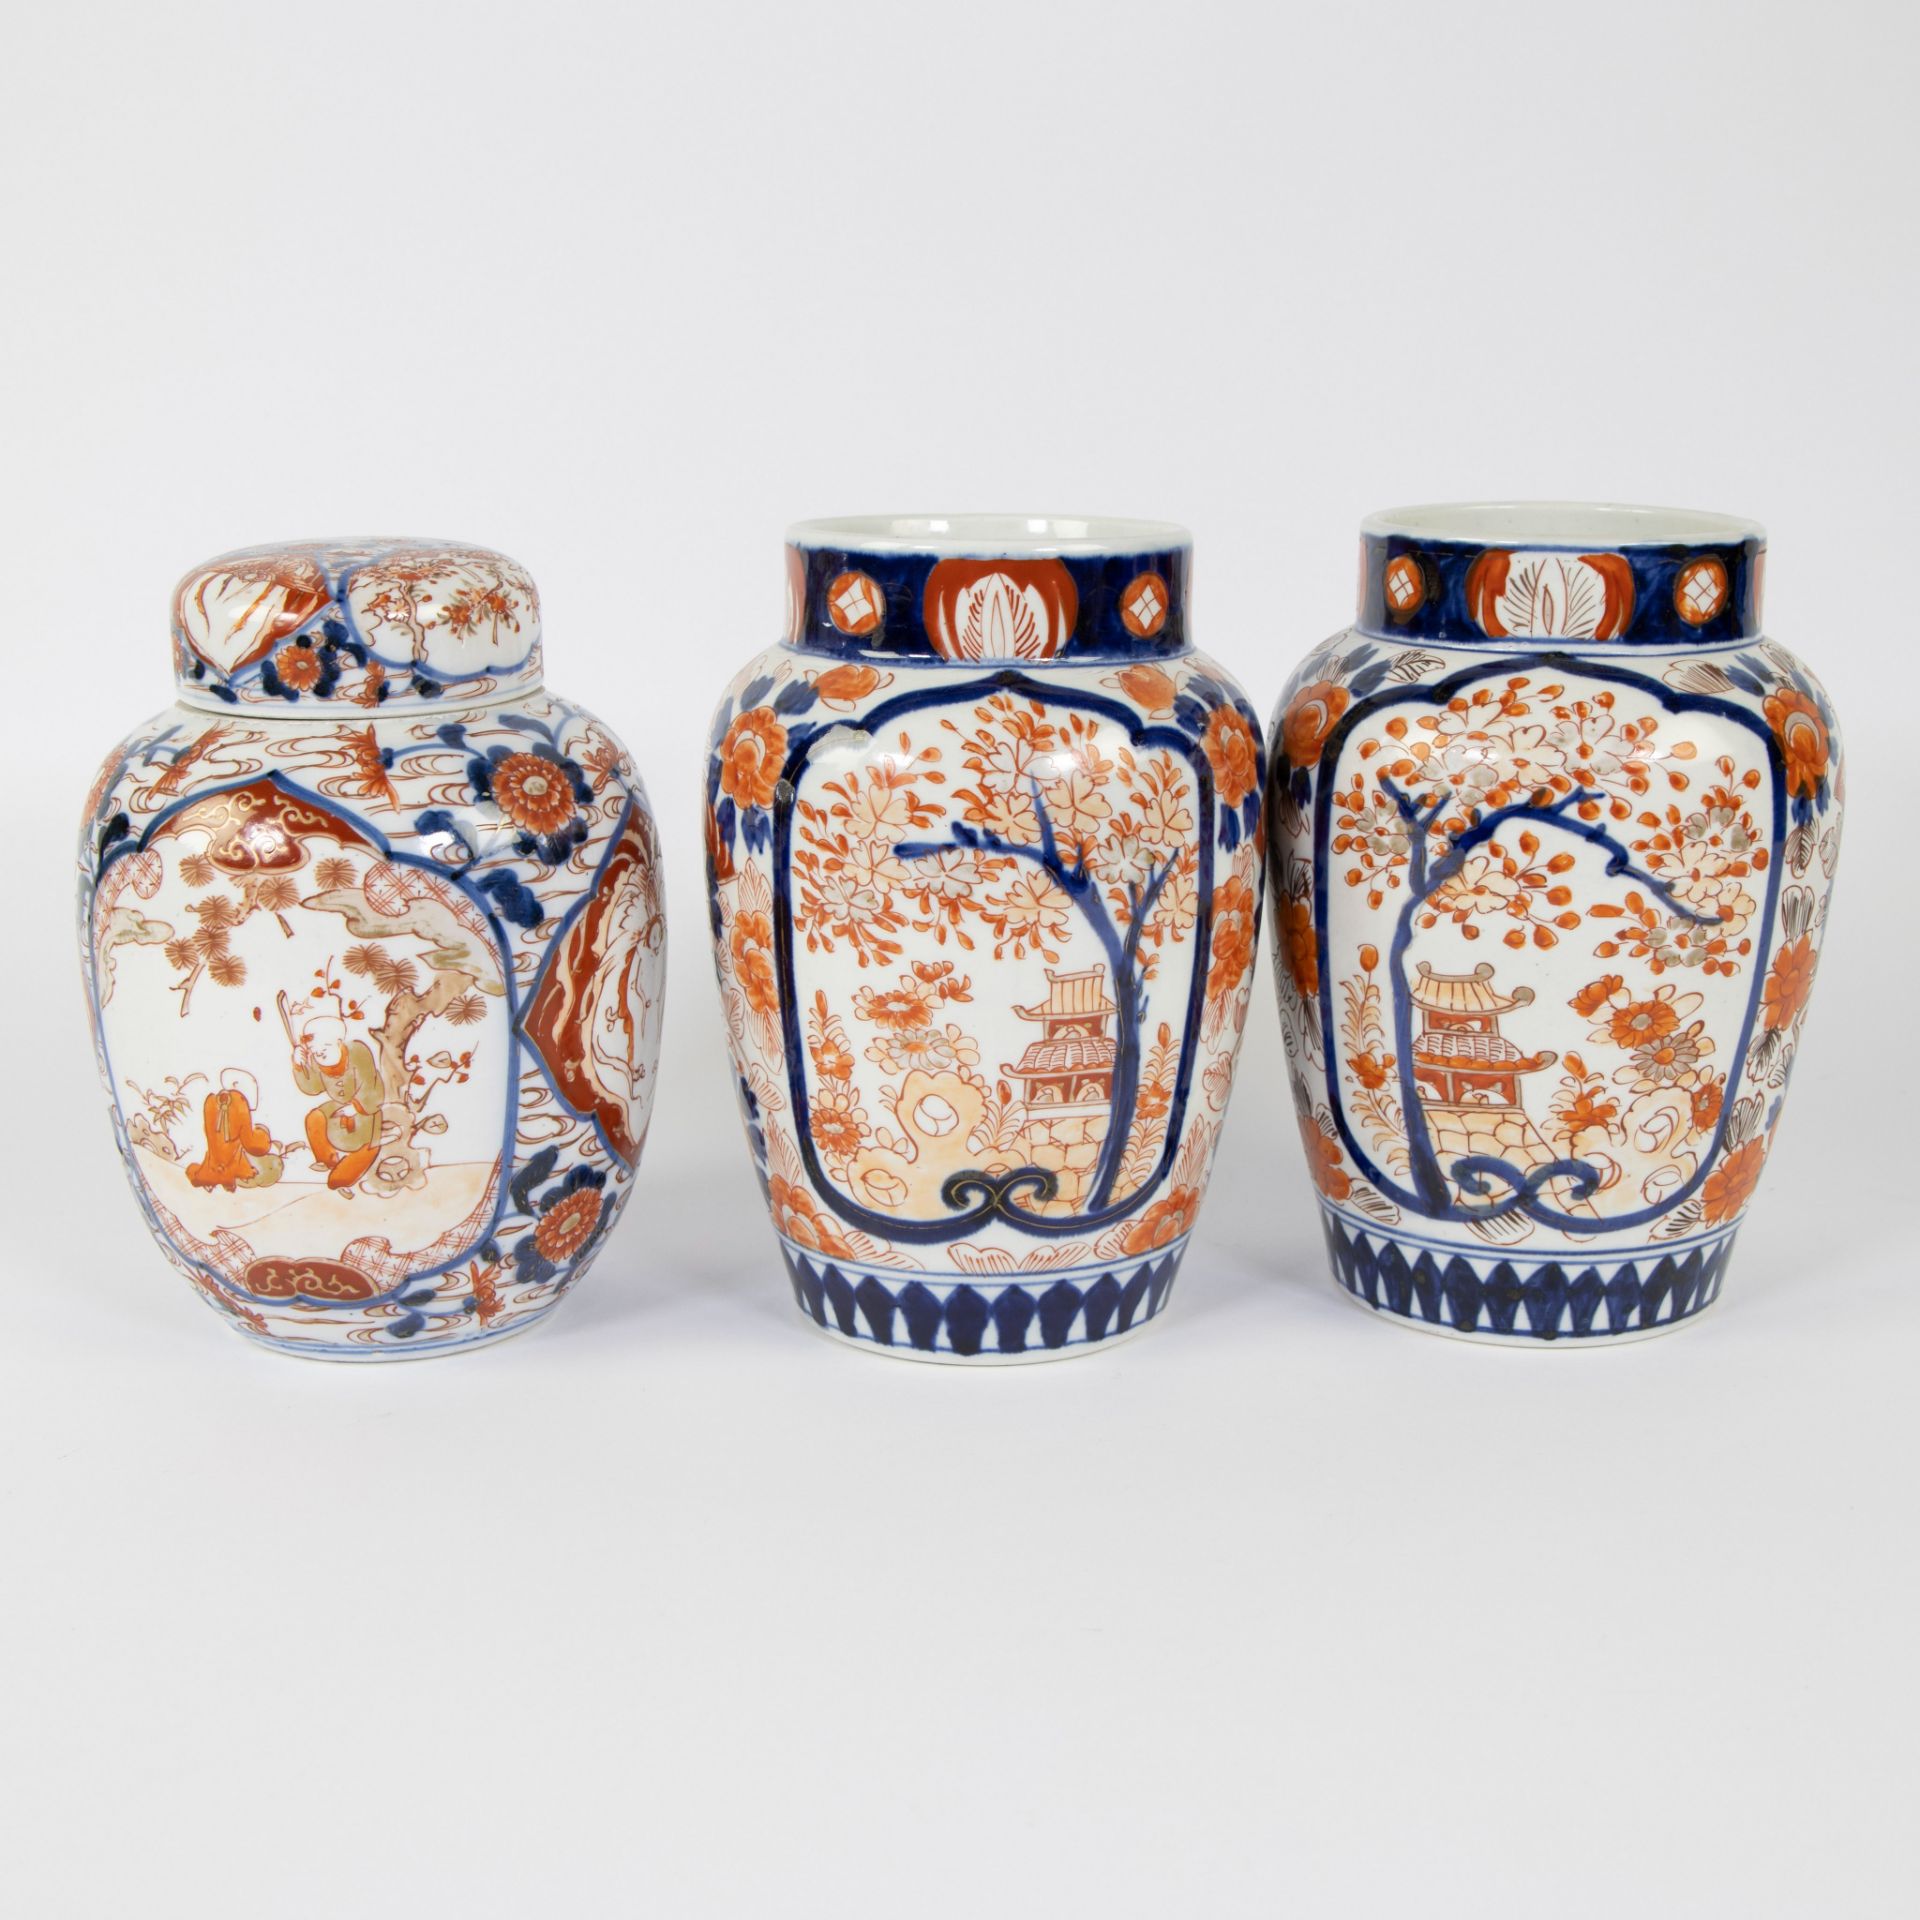 Pair of Japanese Imari lidded vases and one convex lidded vase, 19th century - Image 3 of 6